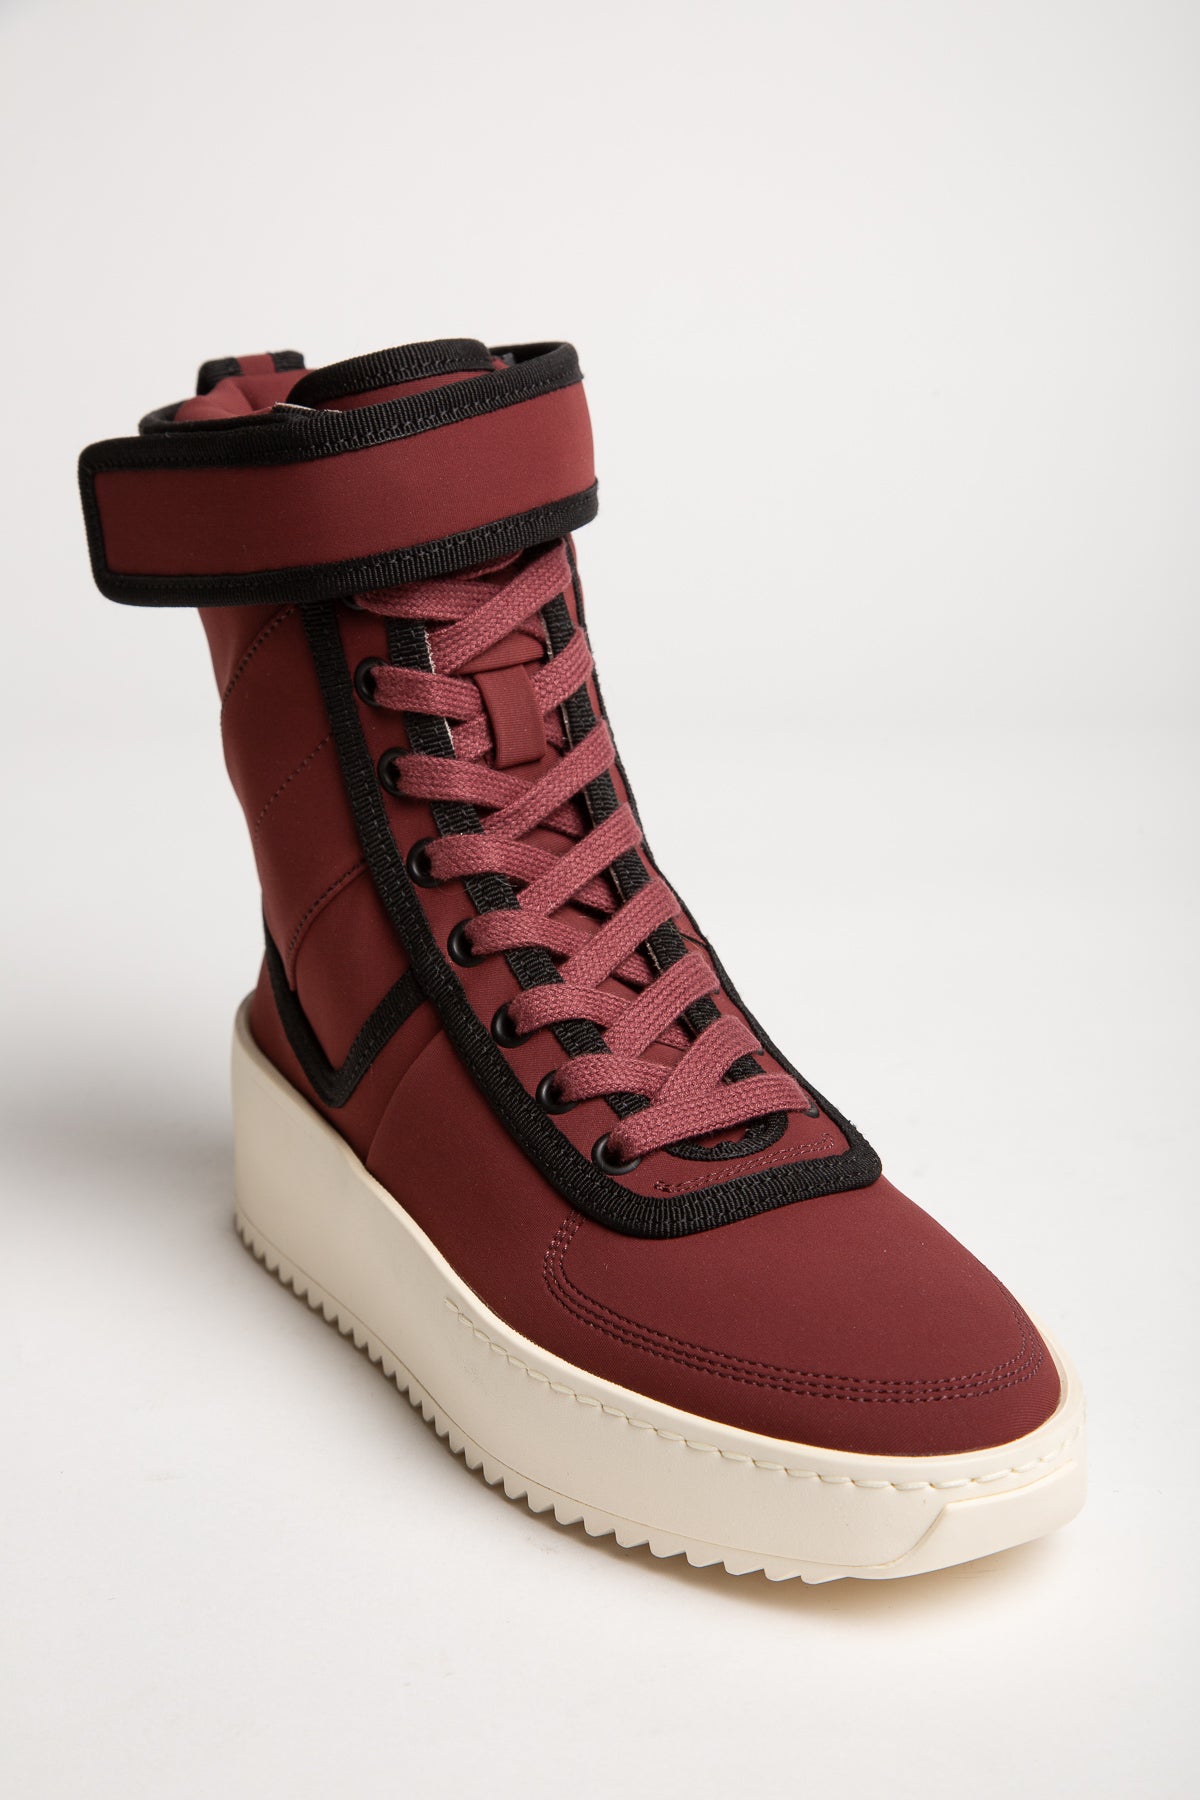 FEAR OF GOD | MILITARY SNEAKERS